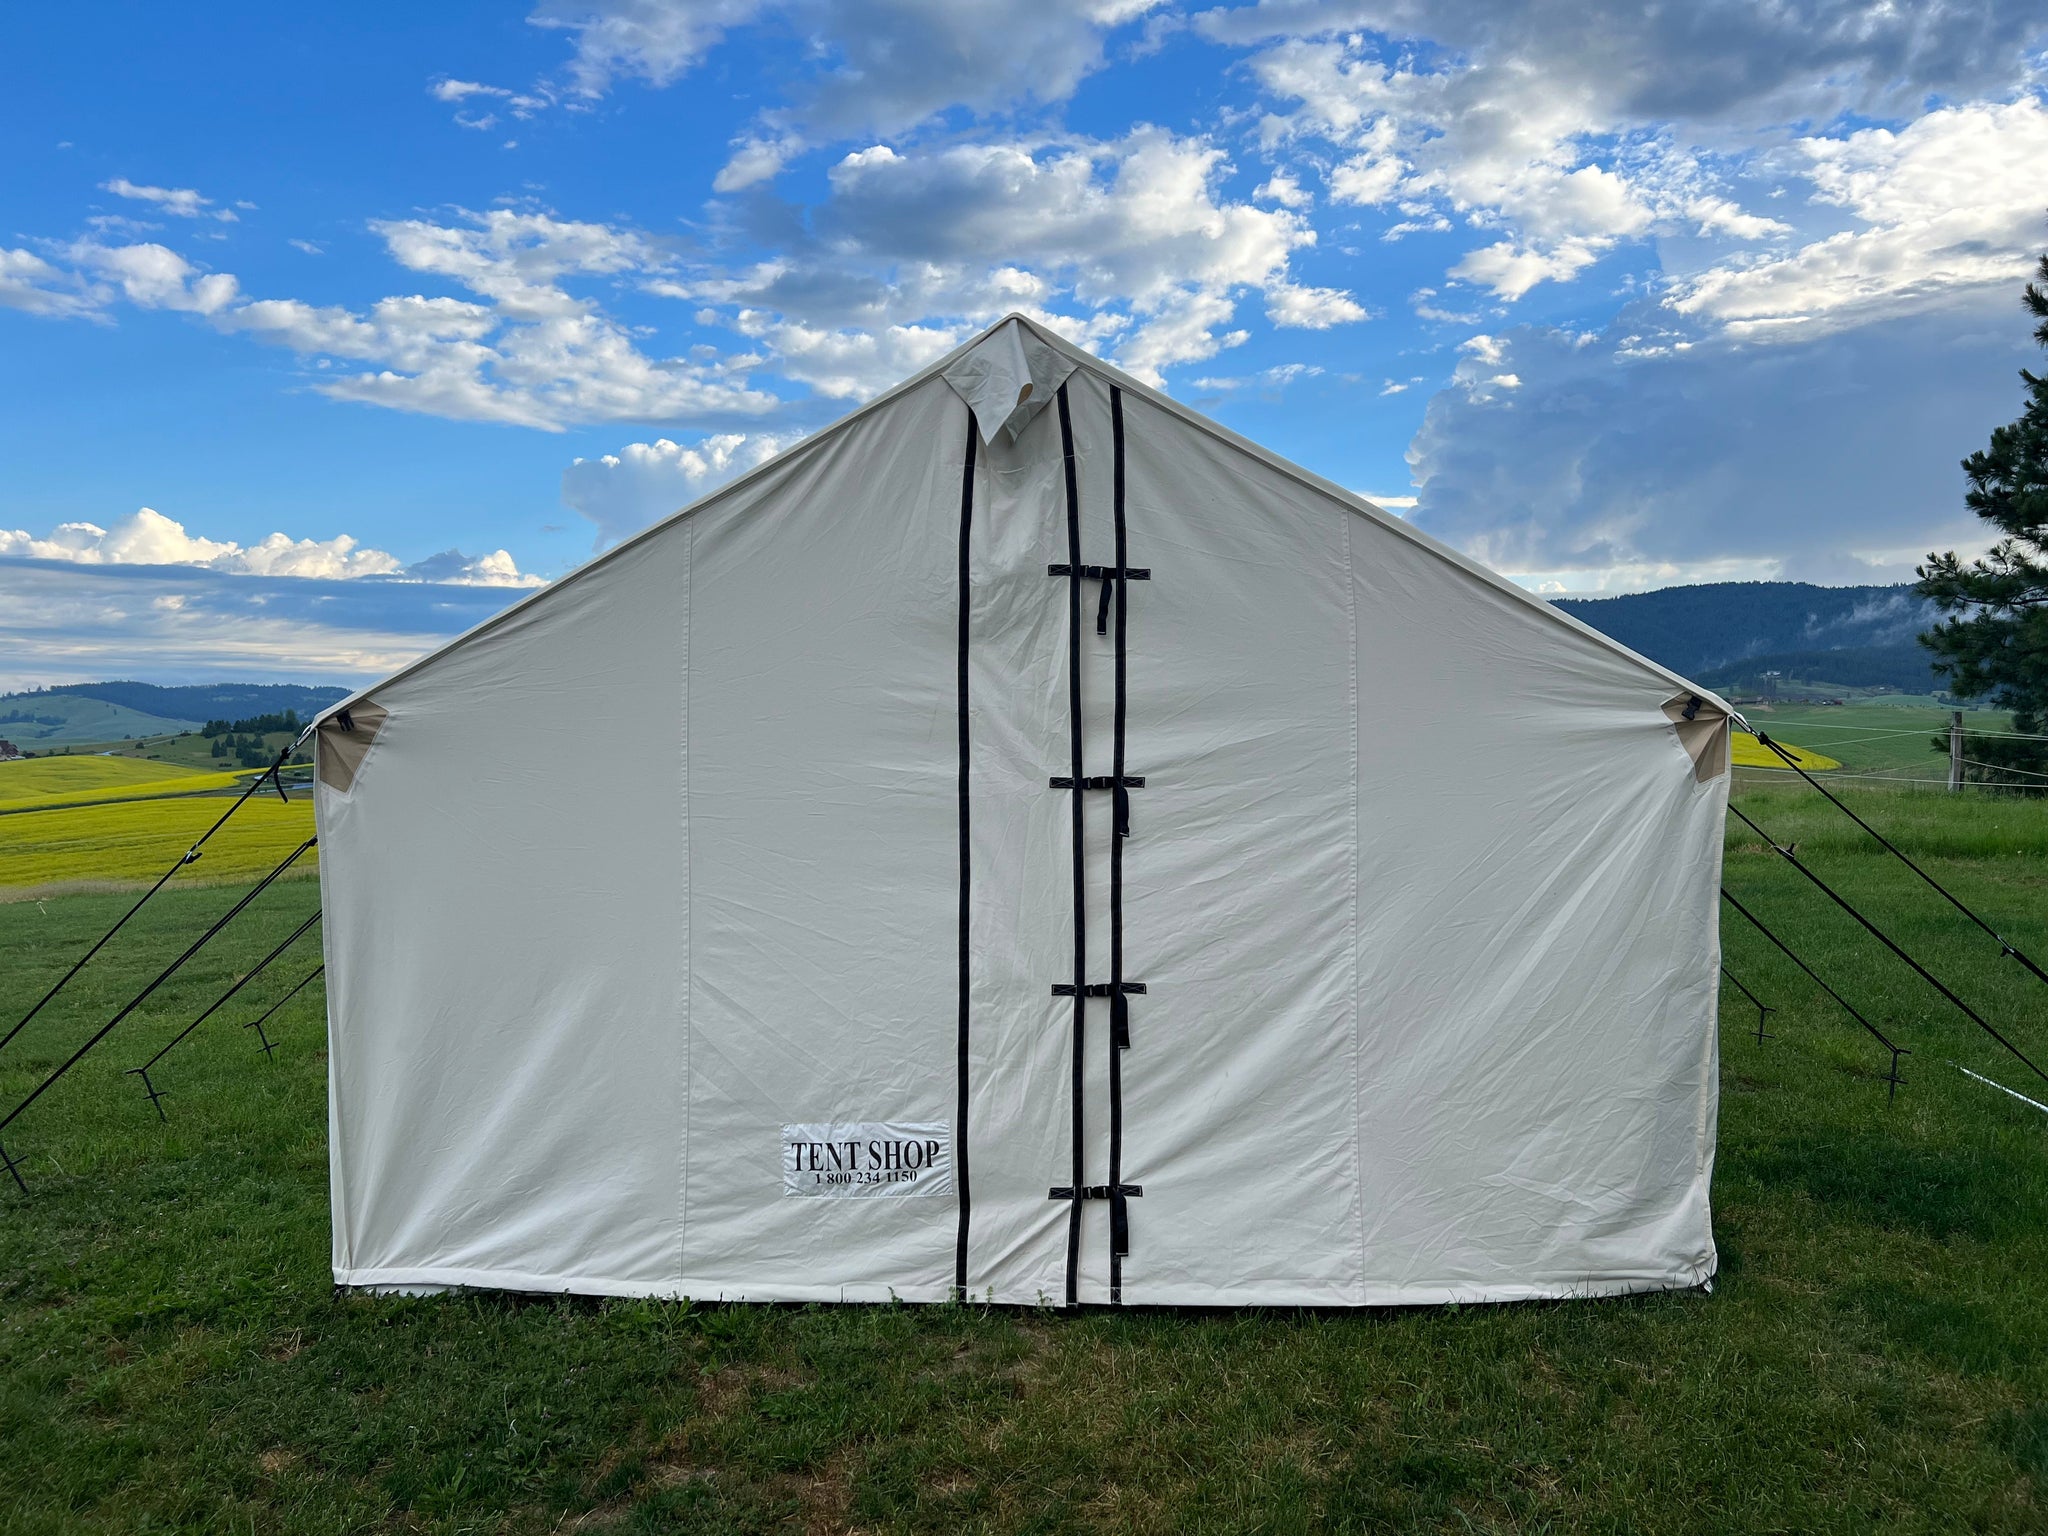 Glamping Tent Package - Tent, Angle Kit, Fly, & Stove